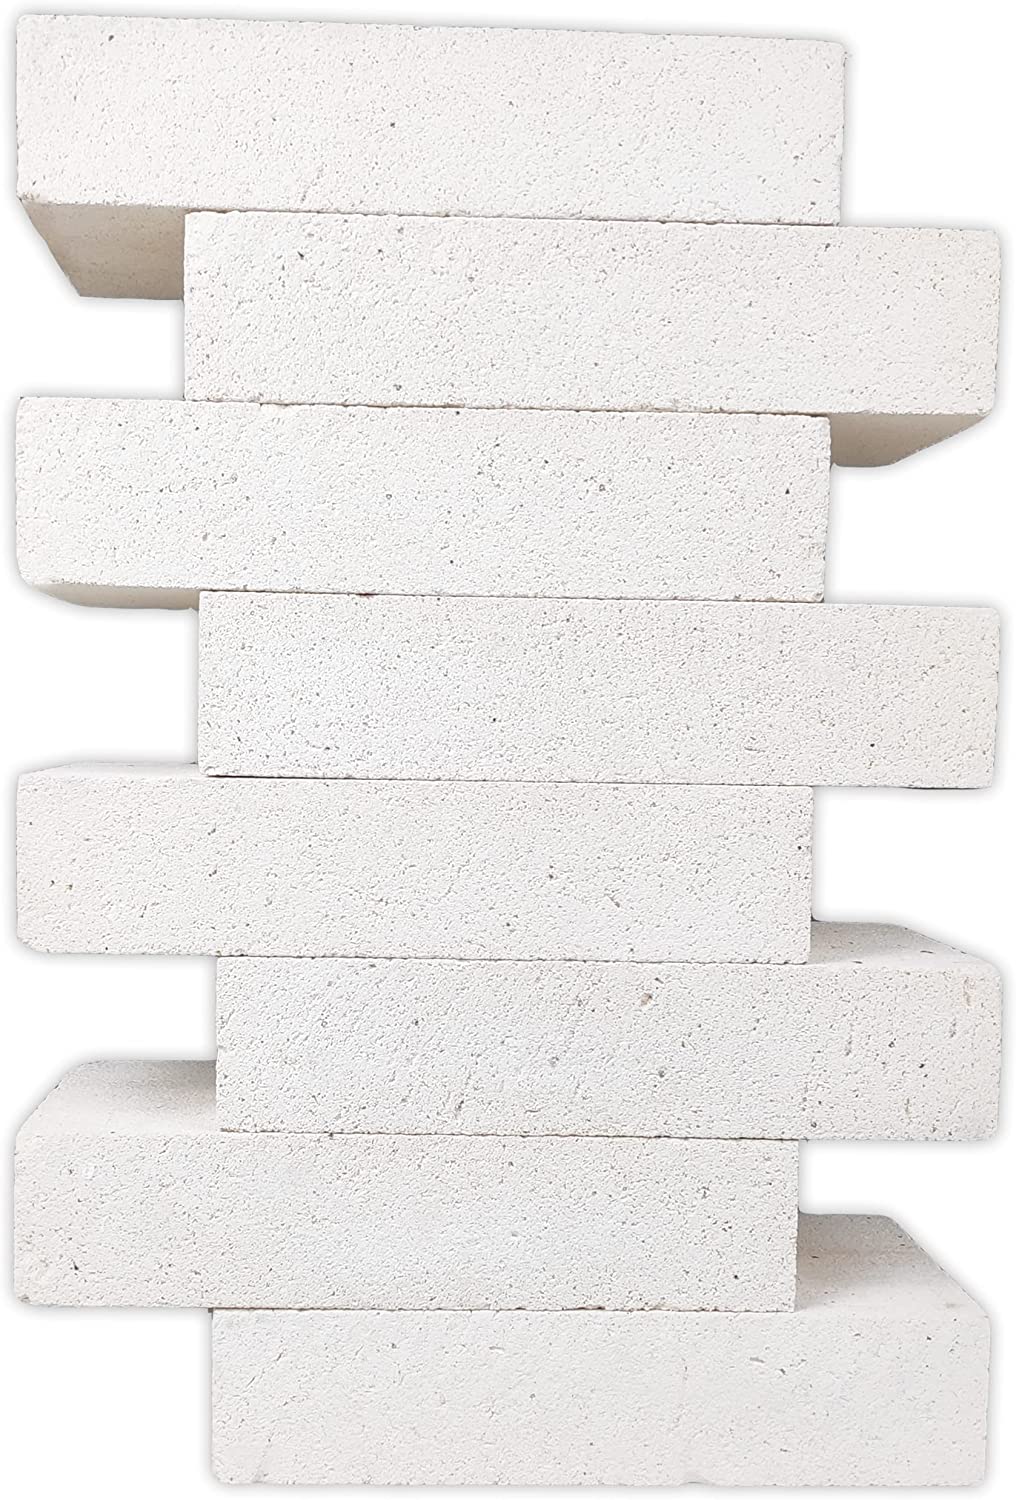 HFK-25 Insulating Firebrick 2500F 2 x 4.5 x 9 IFB Box of 8 Fire Bricks  for Fireplaces, Pizza Ovens, Kilns, Forges